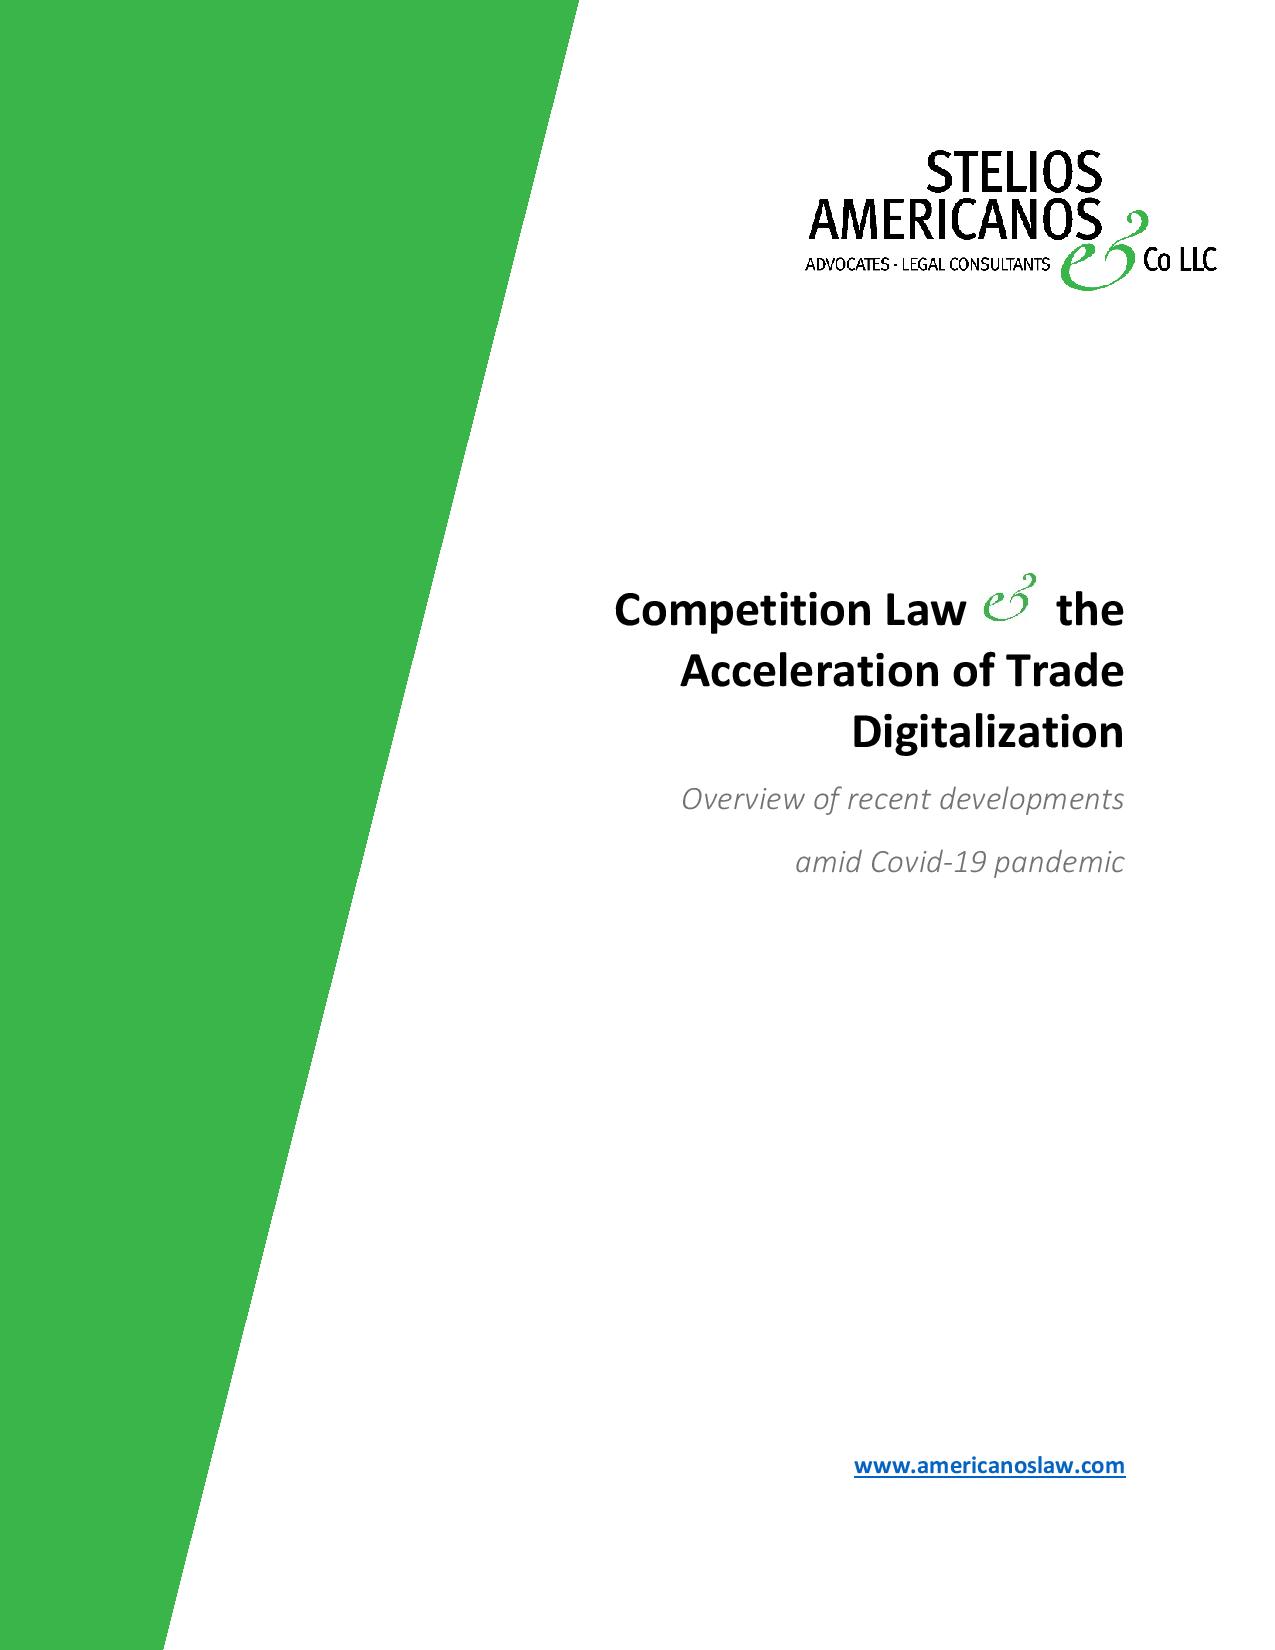 Stelios Americanos & Co LLC: Competition Law the Acceleration of Trade Digitalization